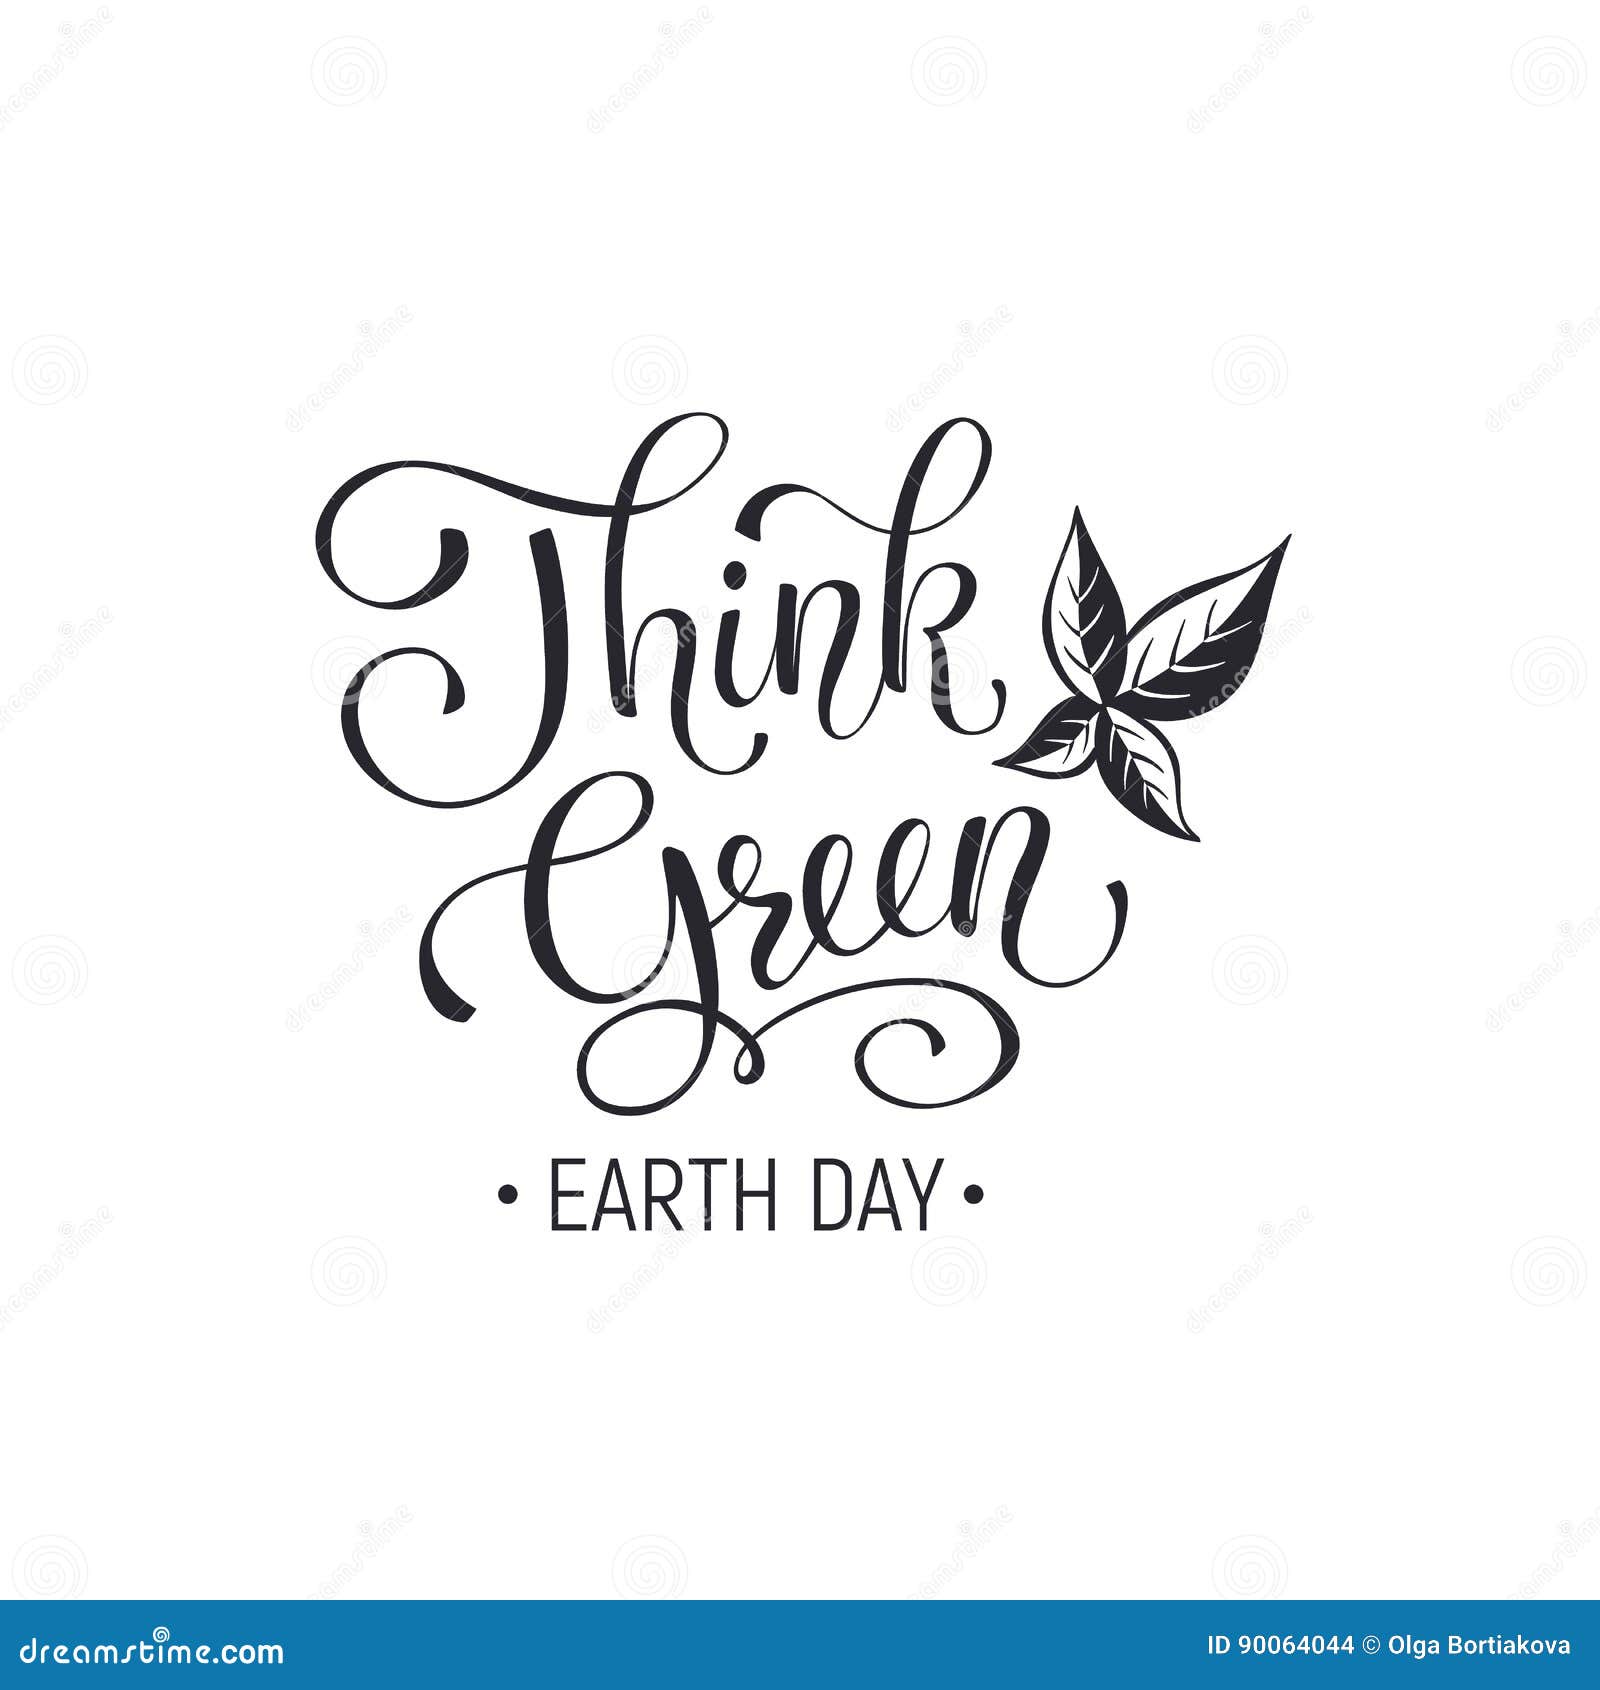 earth day wording